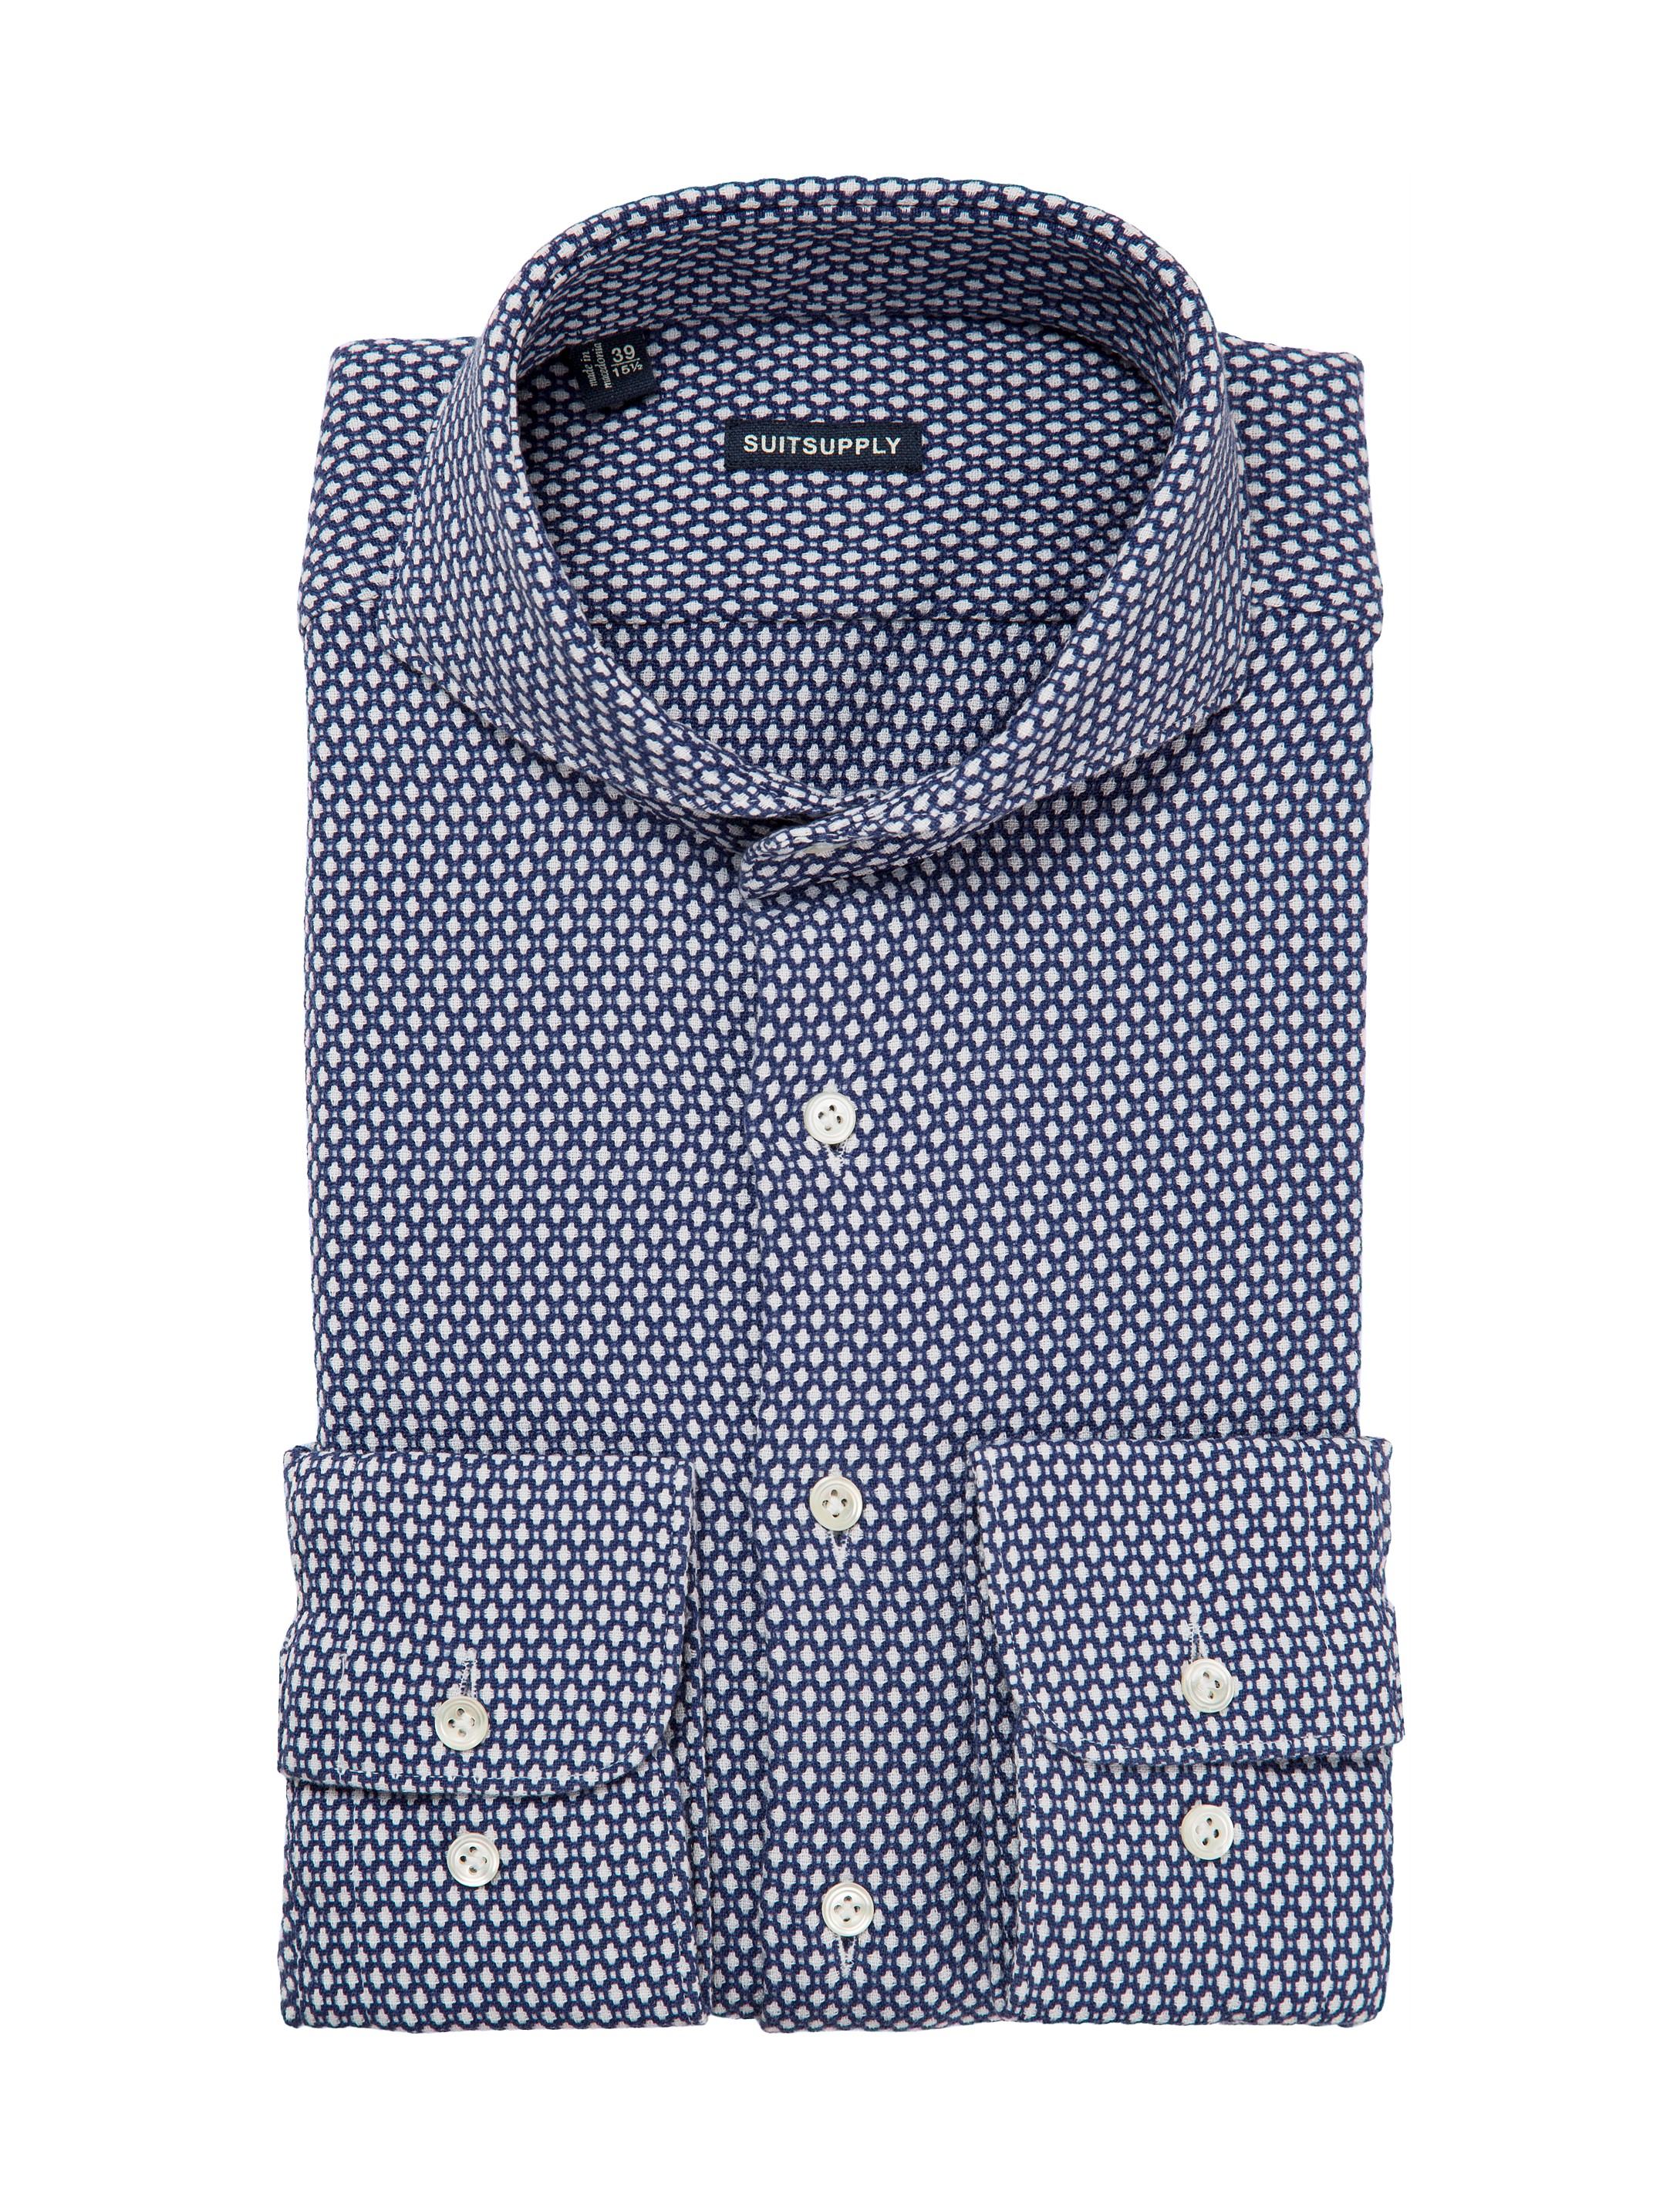 Blue Washed Shirt Single Cuff H4651u | Suitsupply Online Store